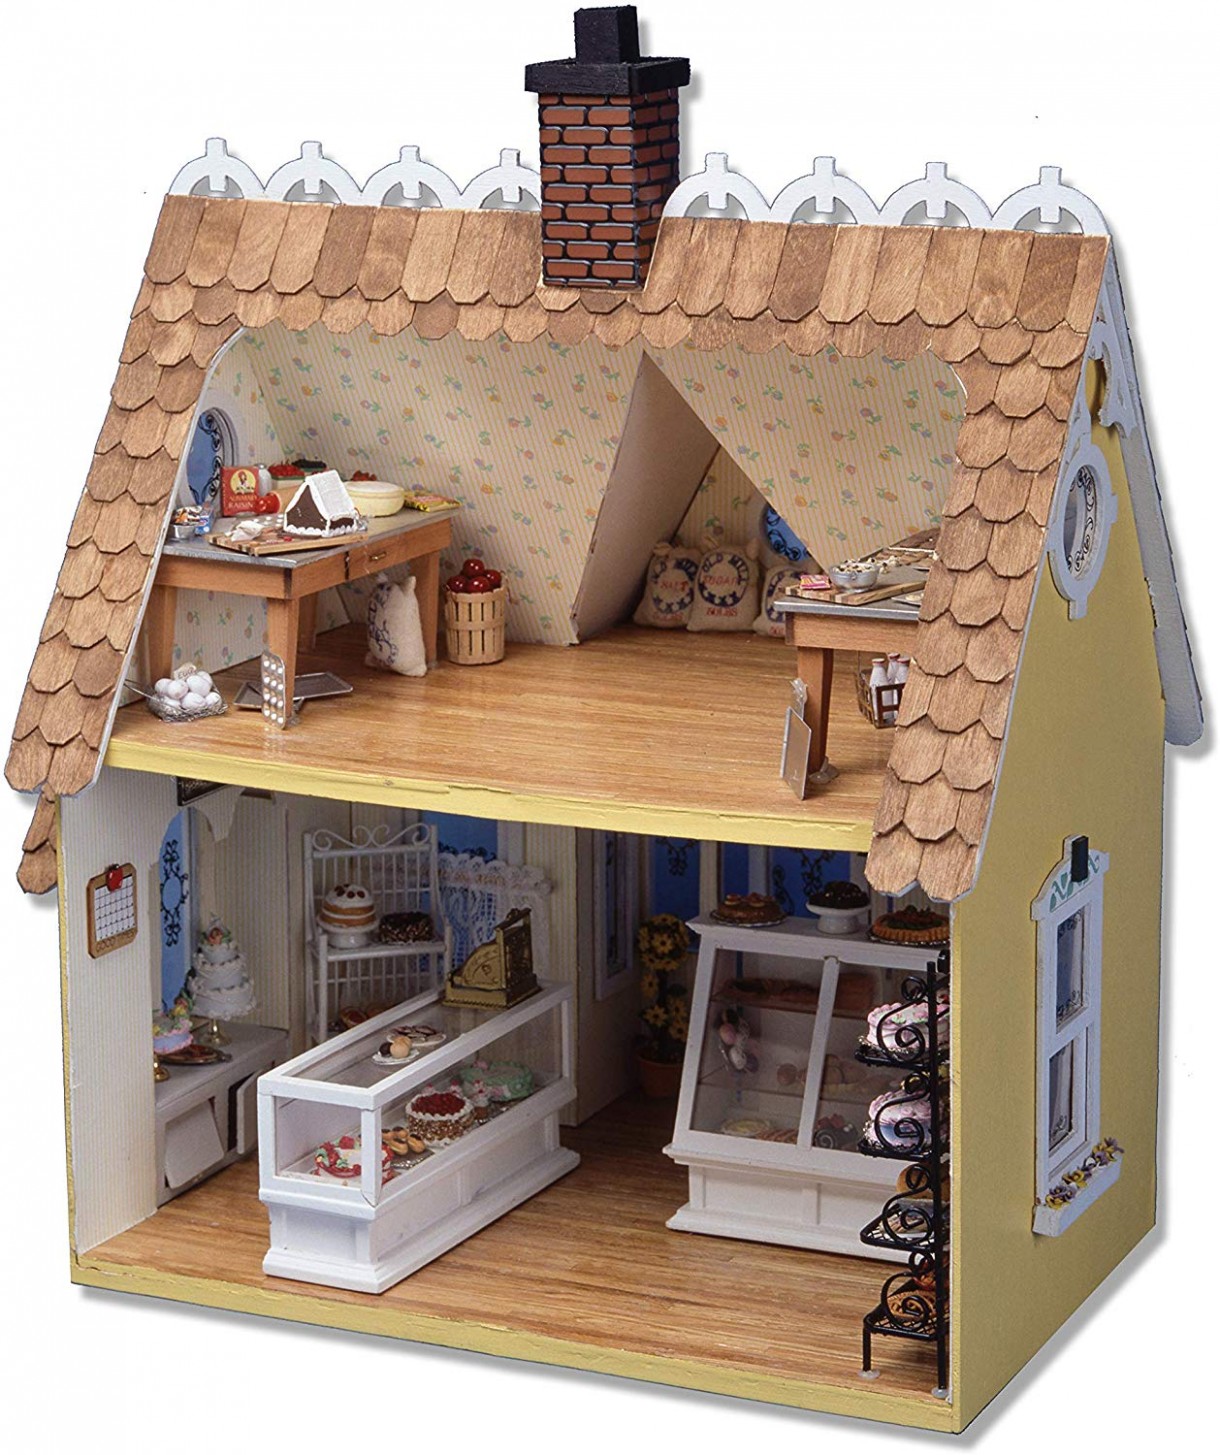 Greenleaf Buttercup Dollhouse Kit 8 Inch Scale Hobby Lobby Miniature Doll Furniture